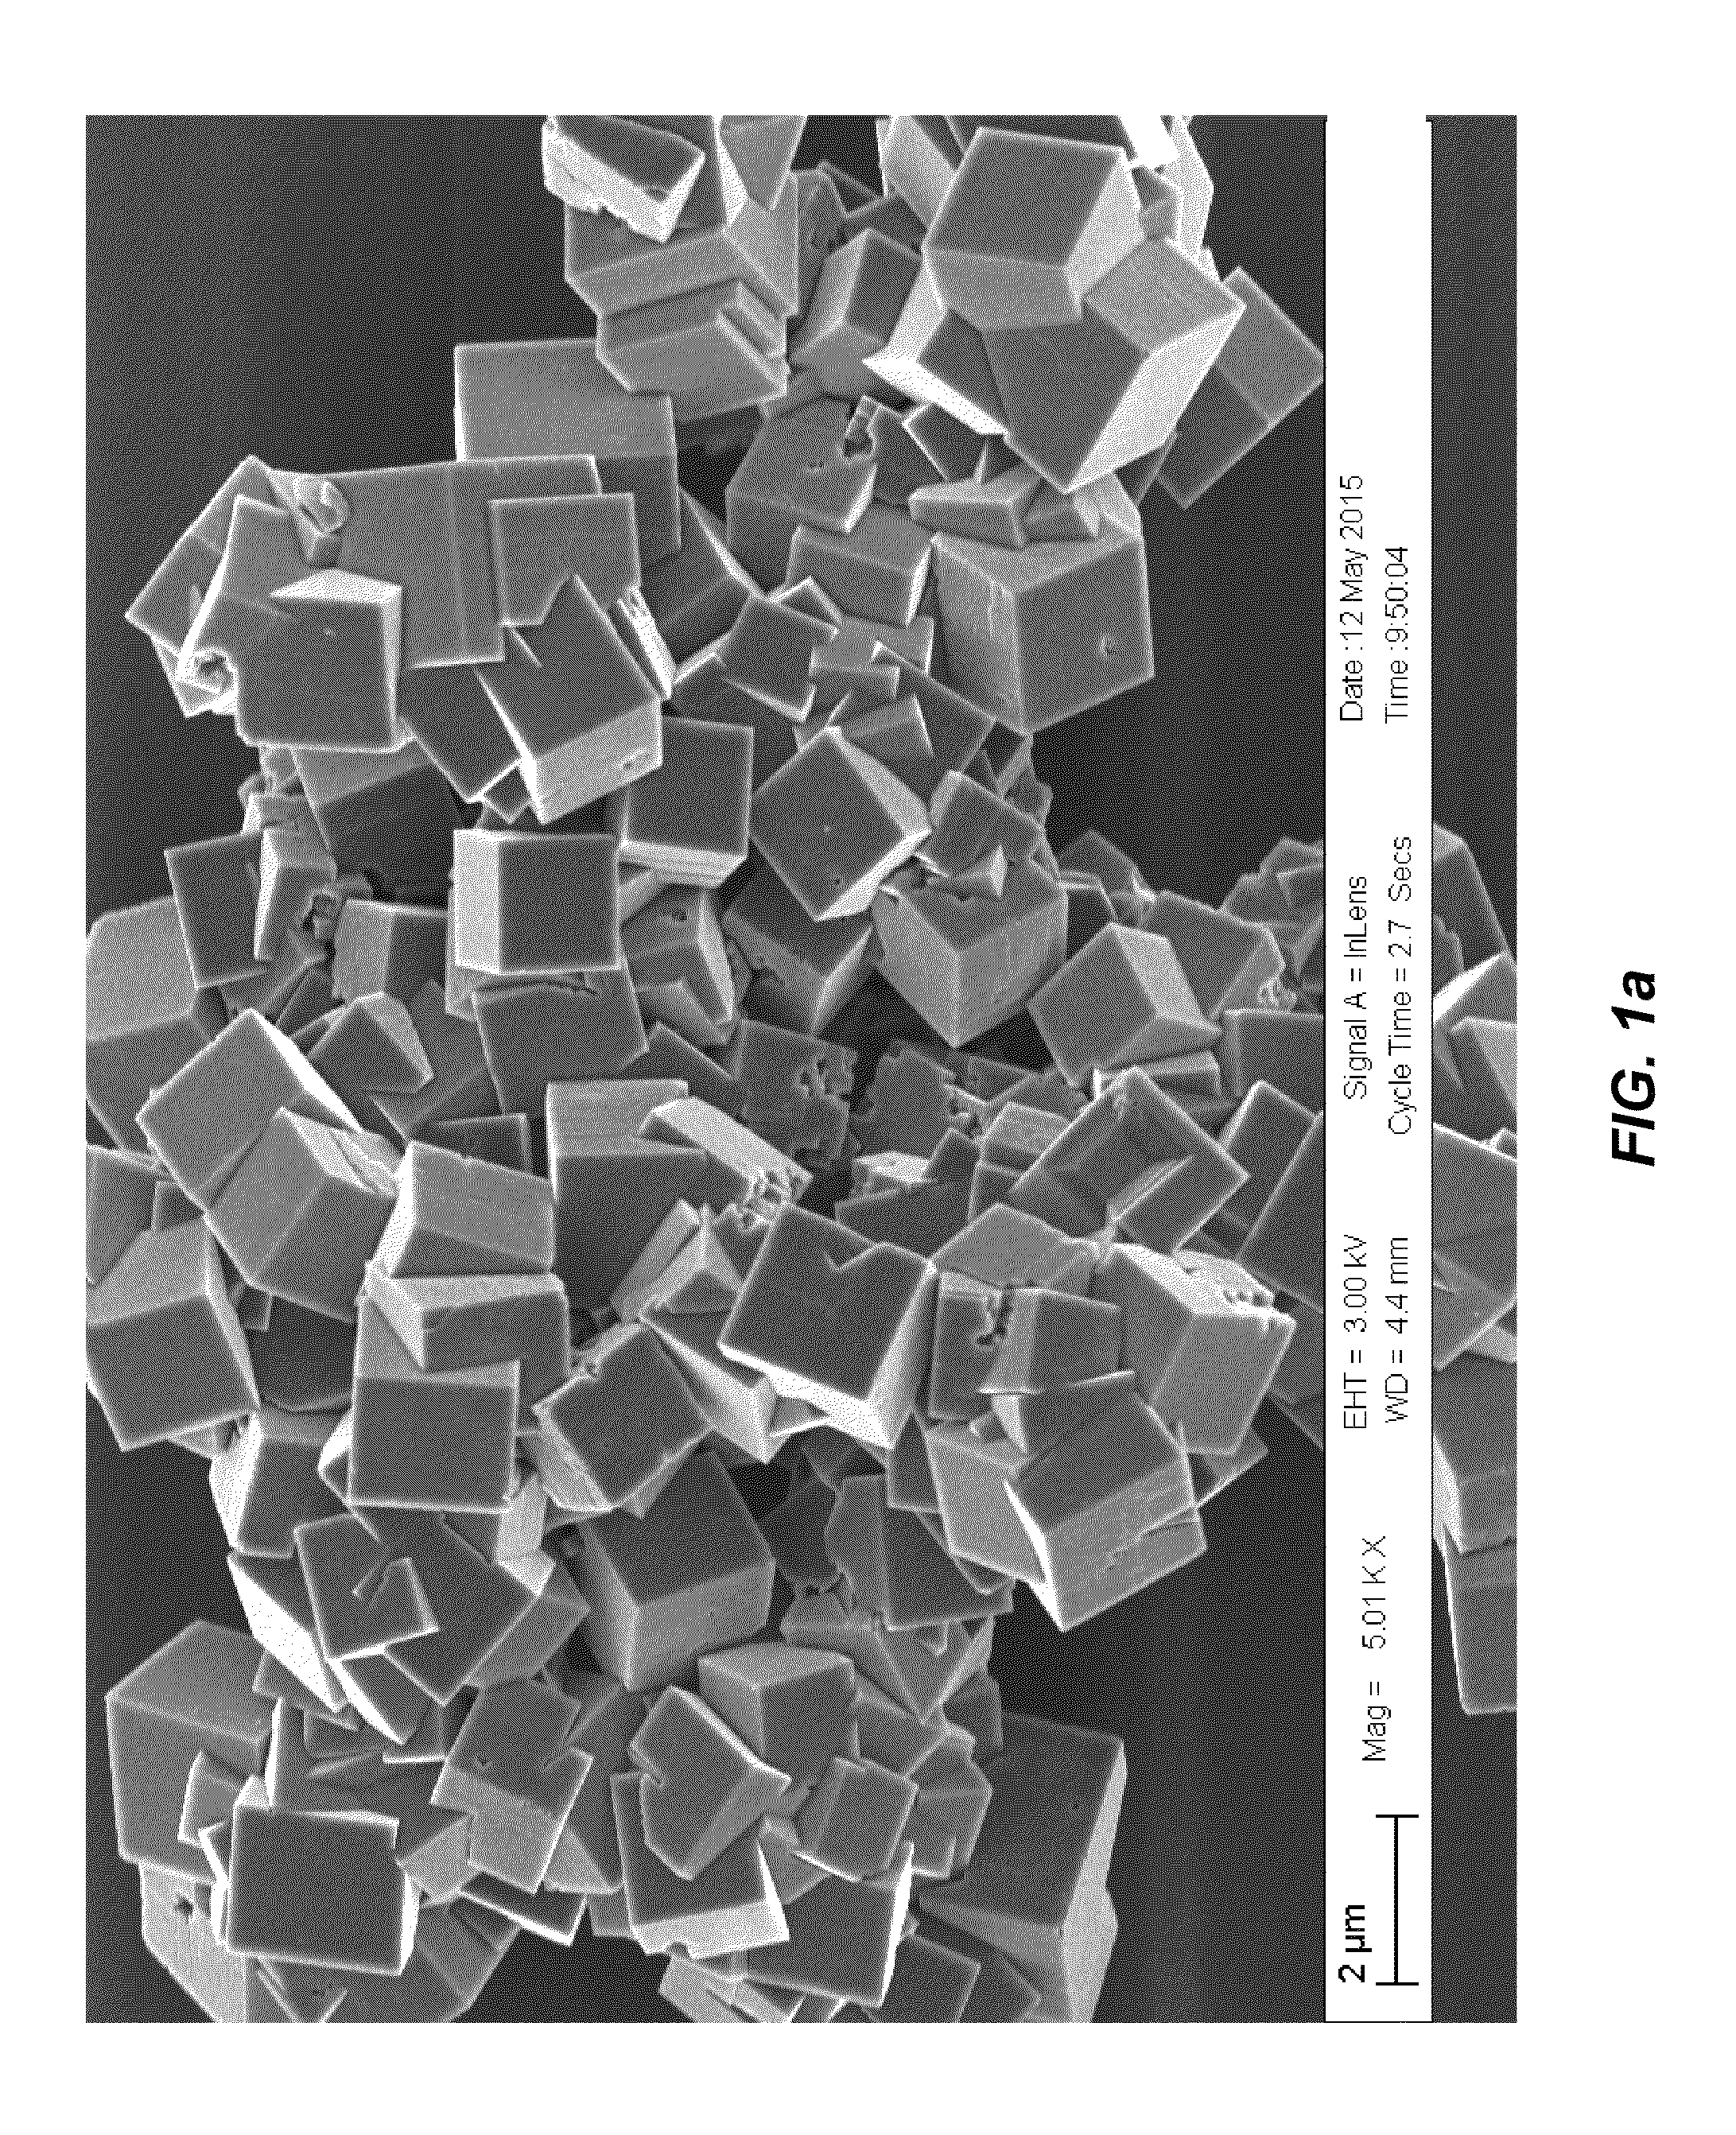 Surface-modified cyanide-based transition metal compounds